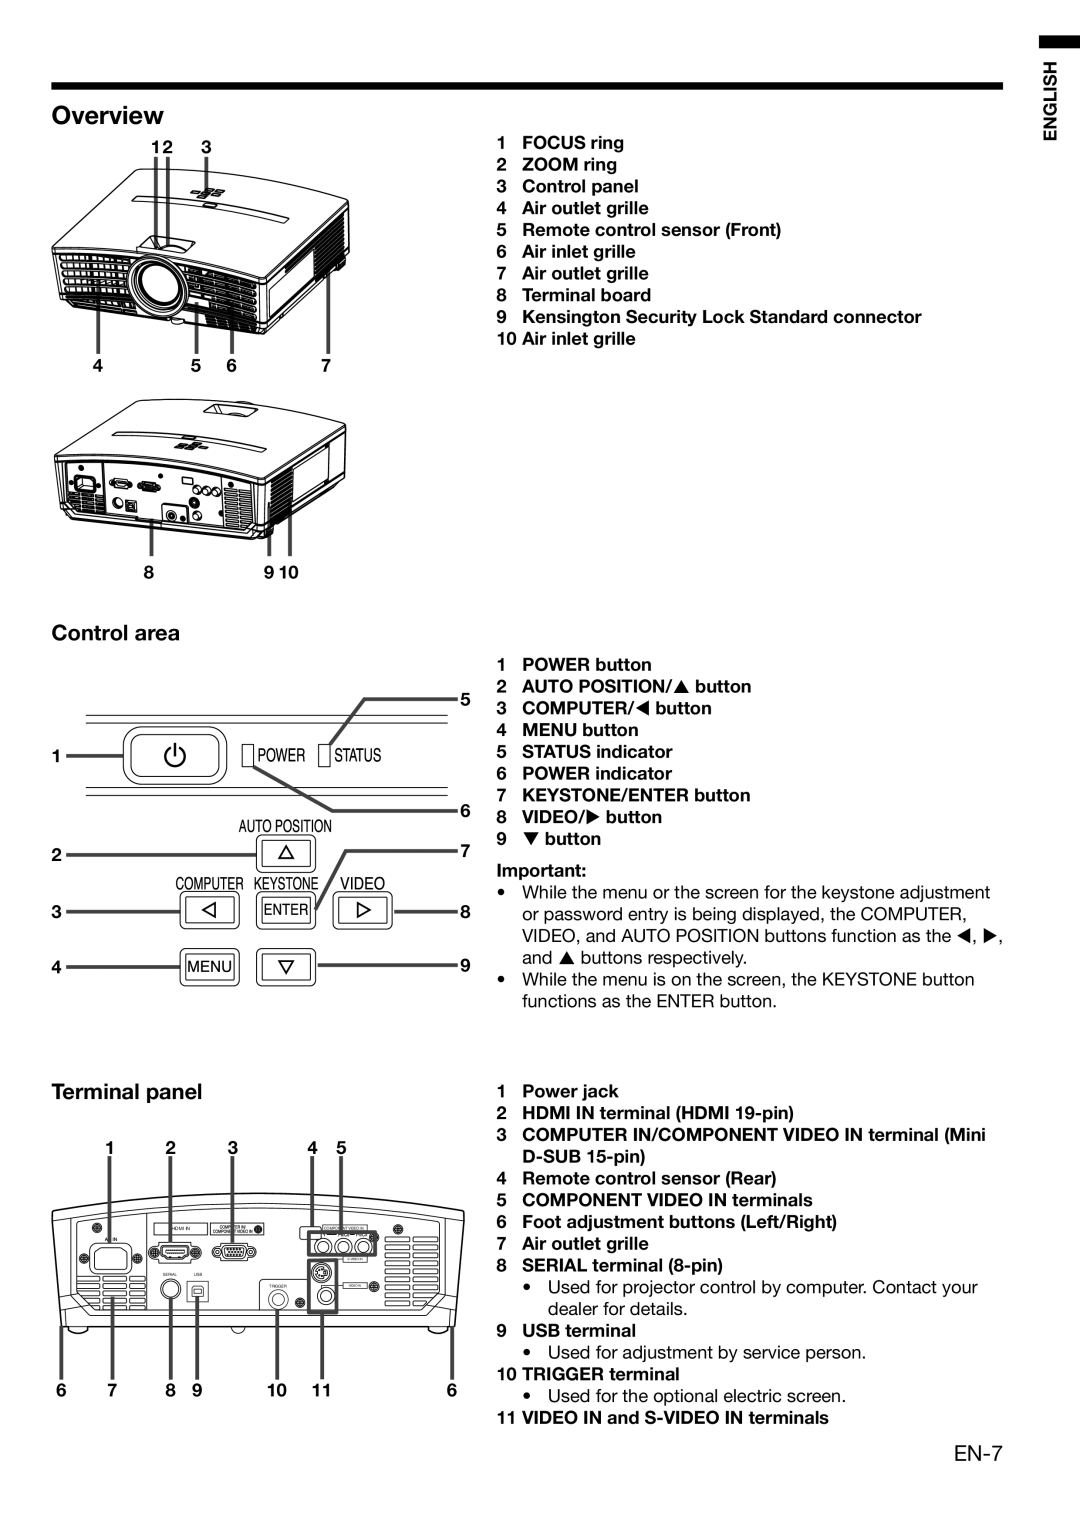 Mitsubishi Electronics HC3100 Overview, Control area, Terminal panel, Air inlet grille, POWER button, COMPUTER/  button 